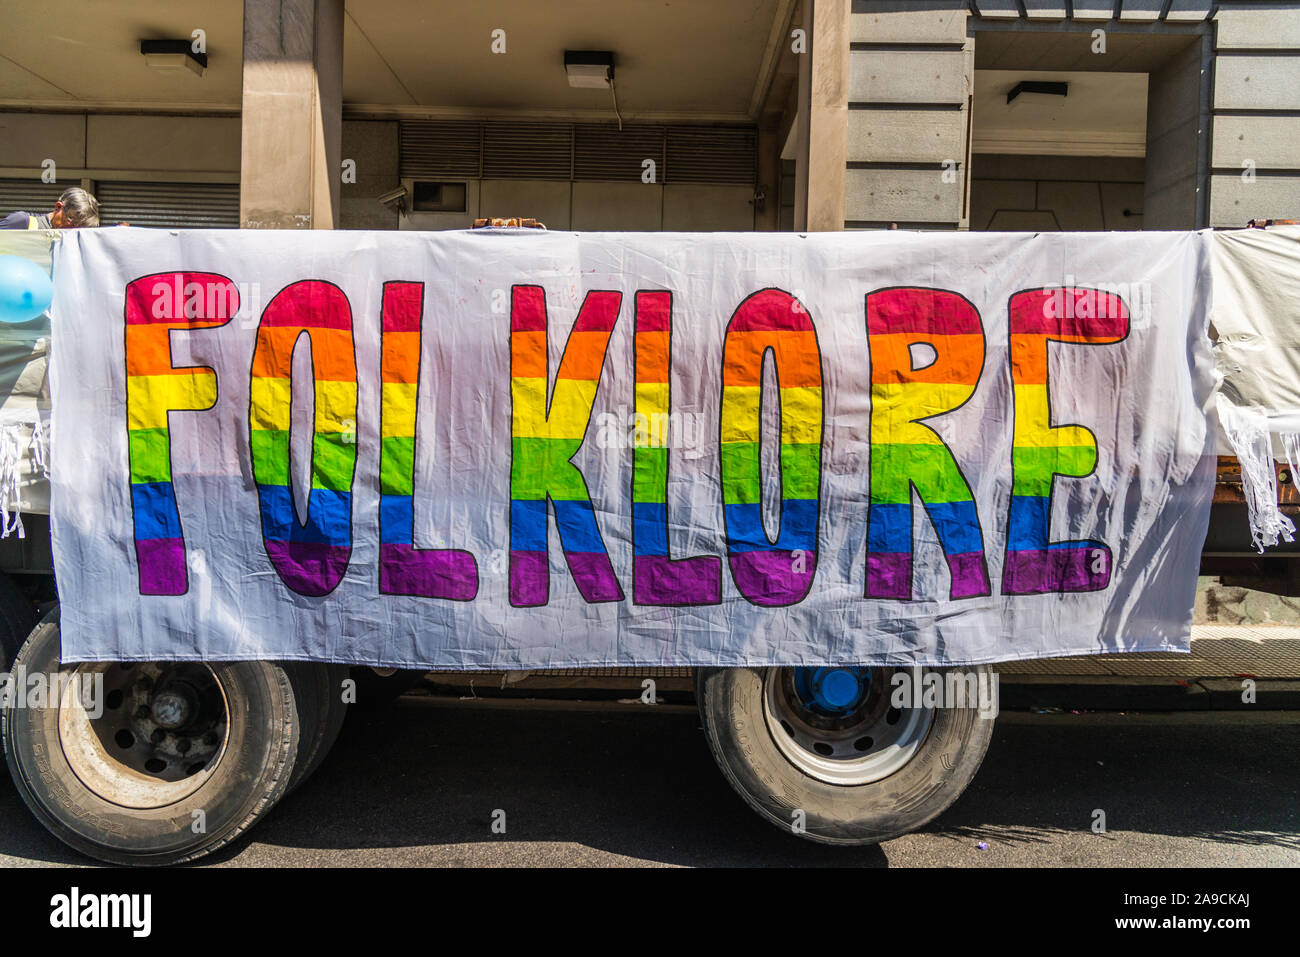 Buenos Aires, Argentina - November 2, 2019: Trucks at the Buenos Aires Pride Day Stock Photo